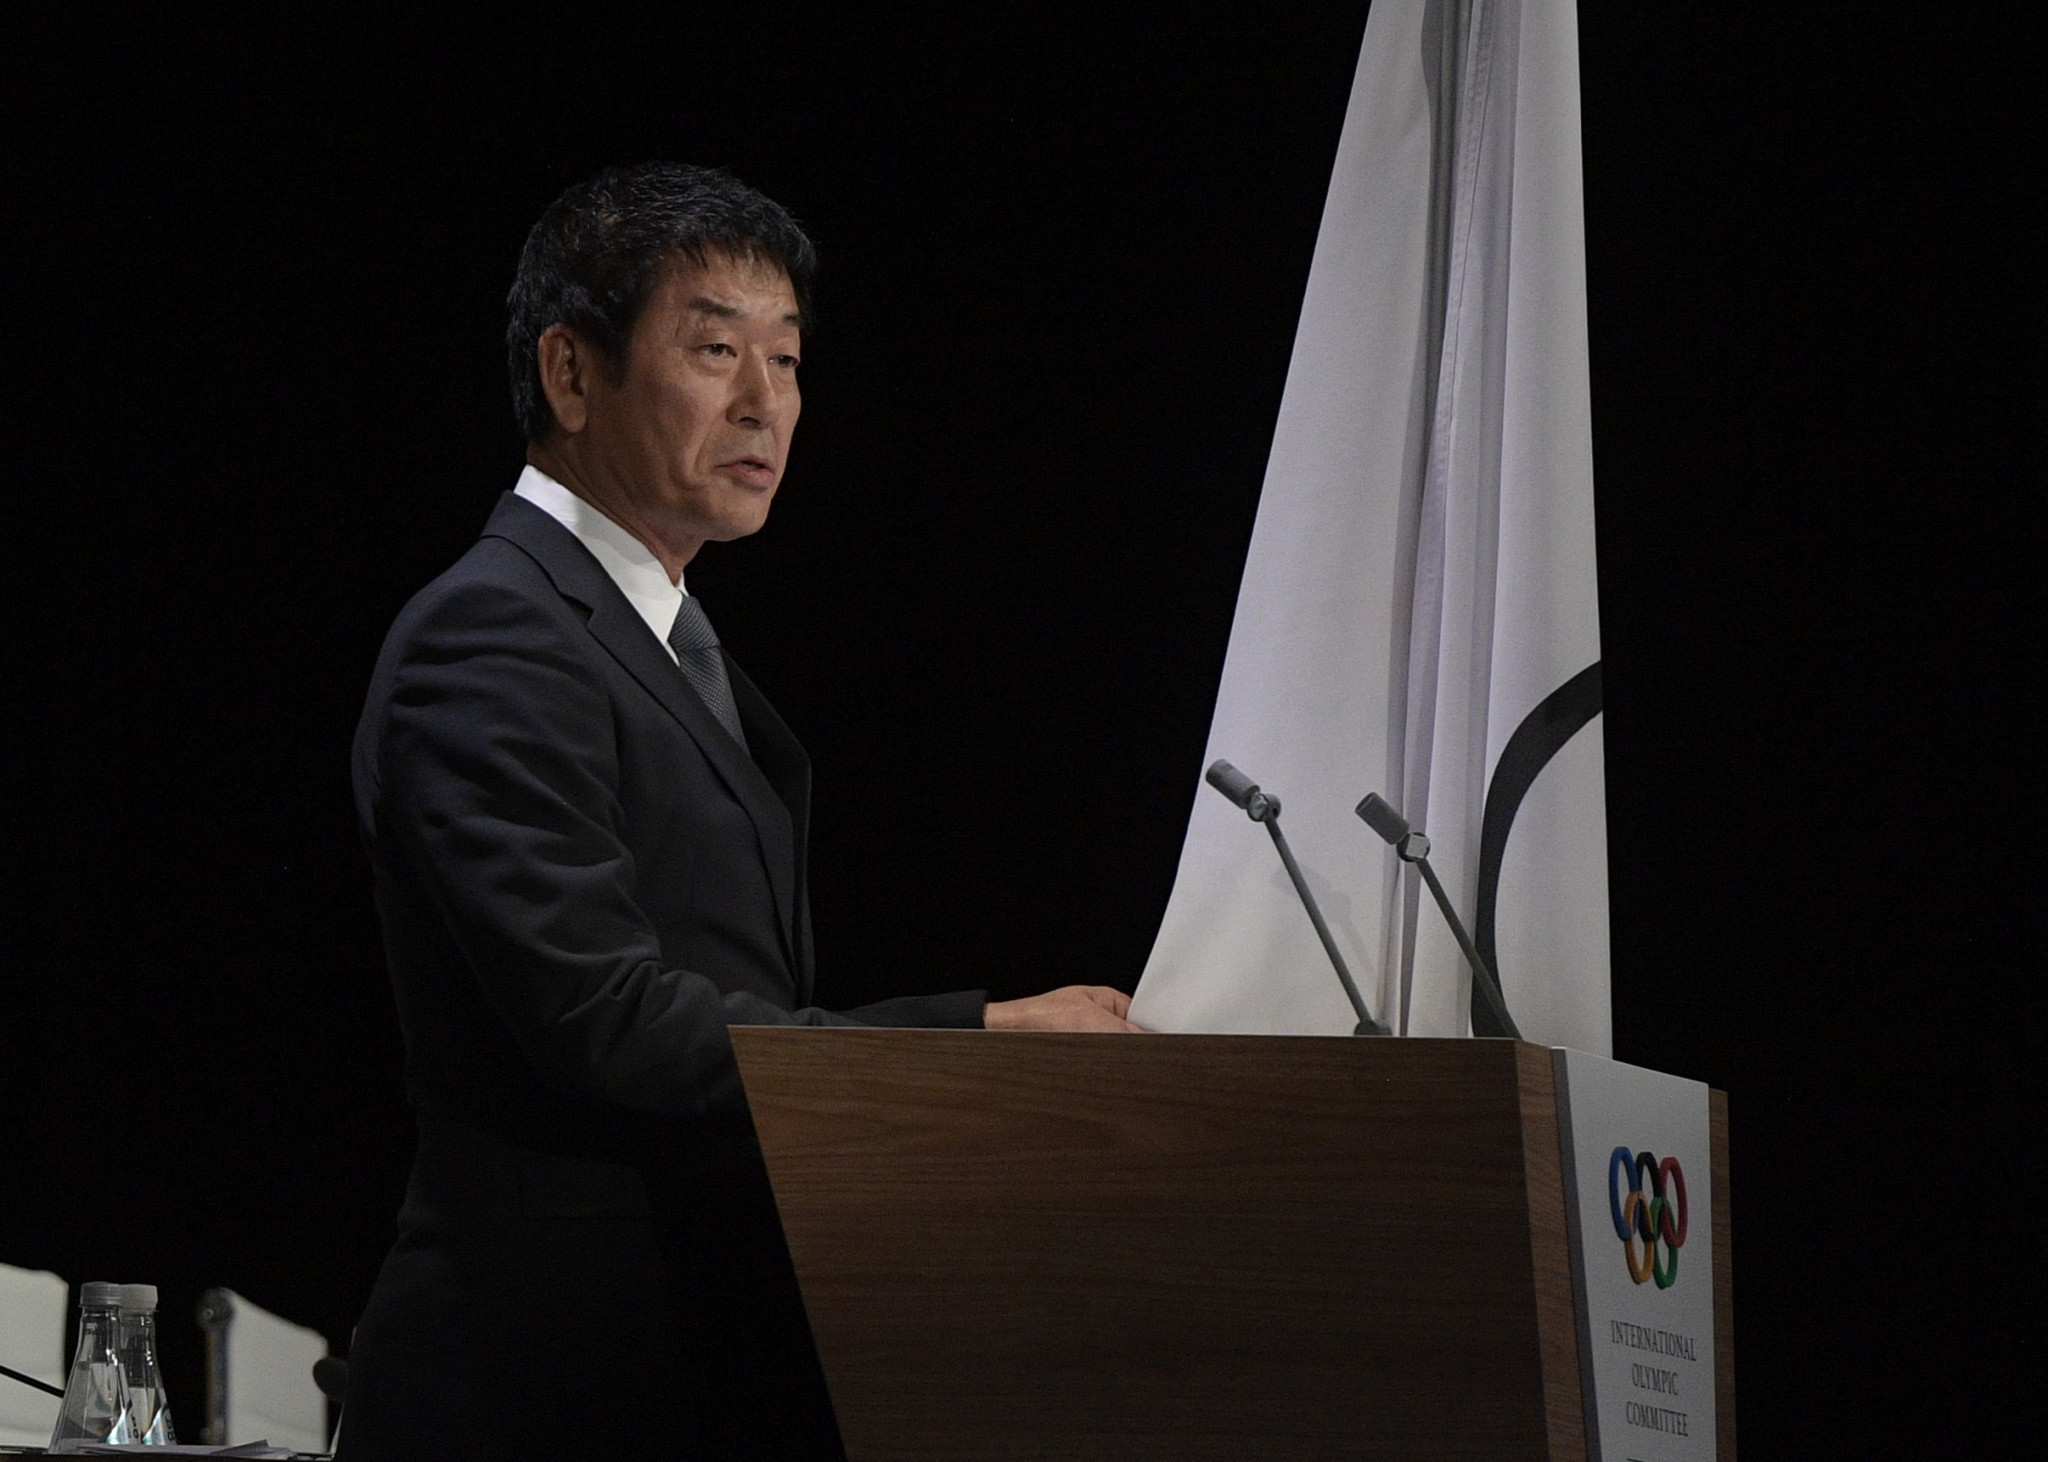 FIG President Morinari Watanabe reflected on the Larry Nassar scandal in his New Year's message ©Getty Images